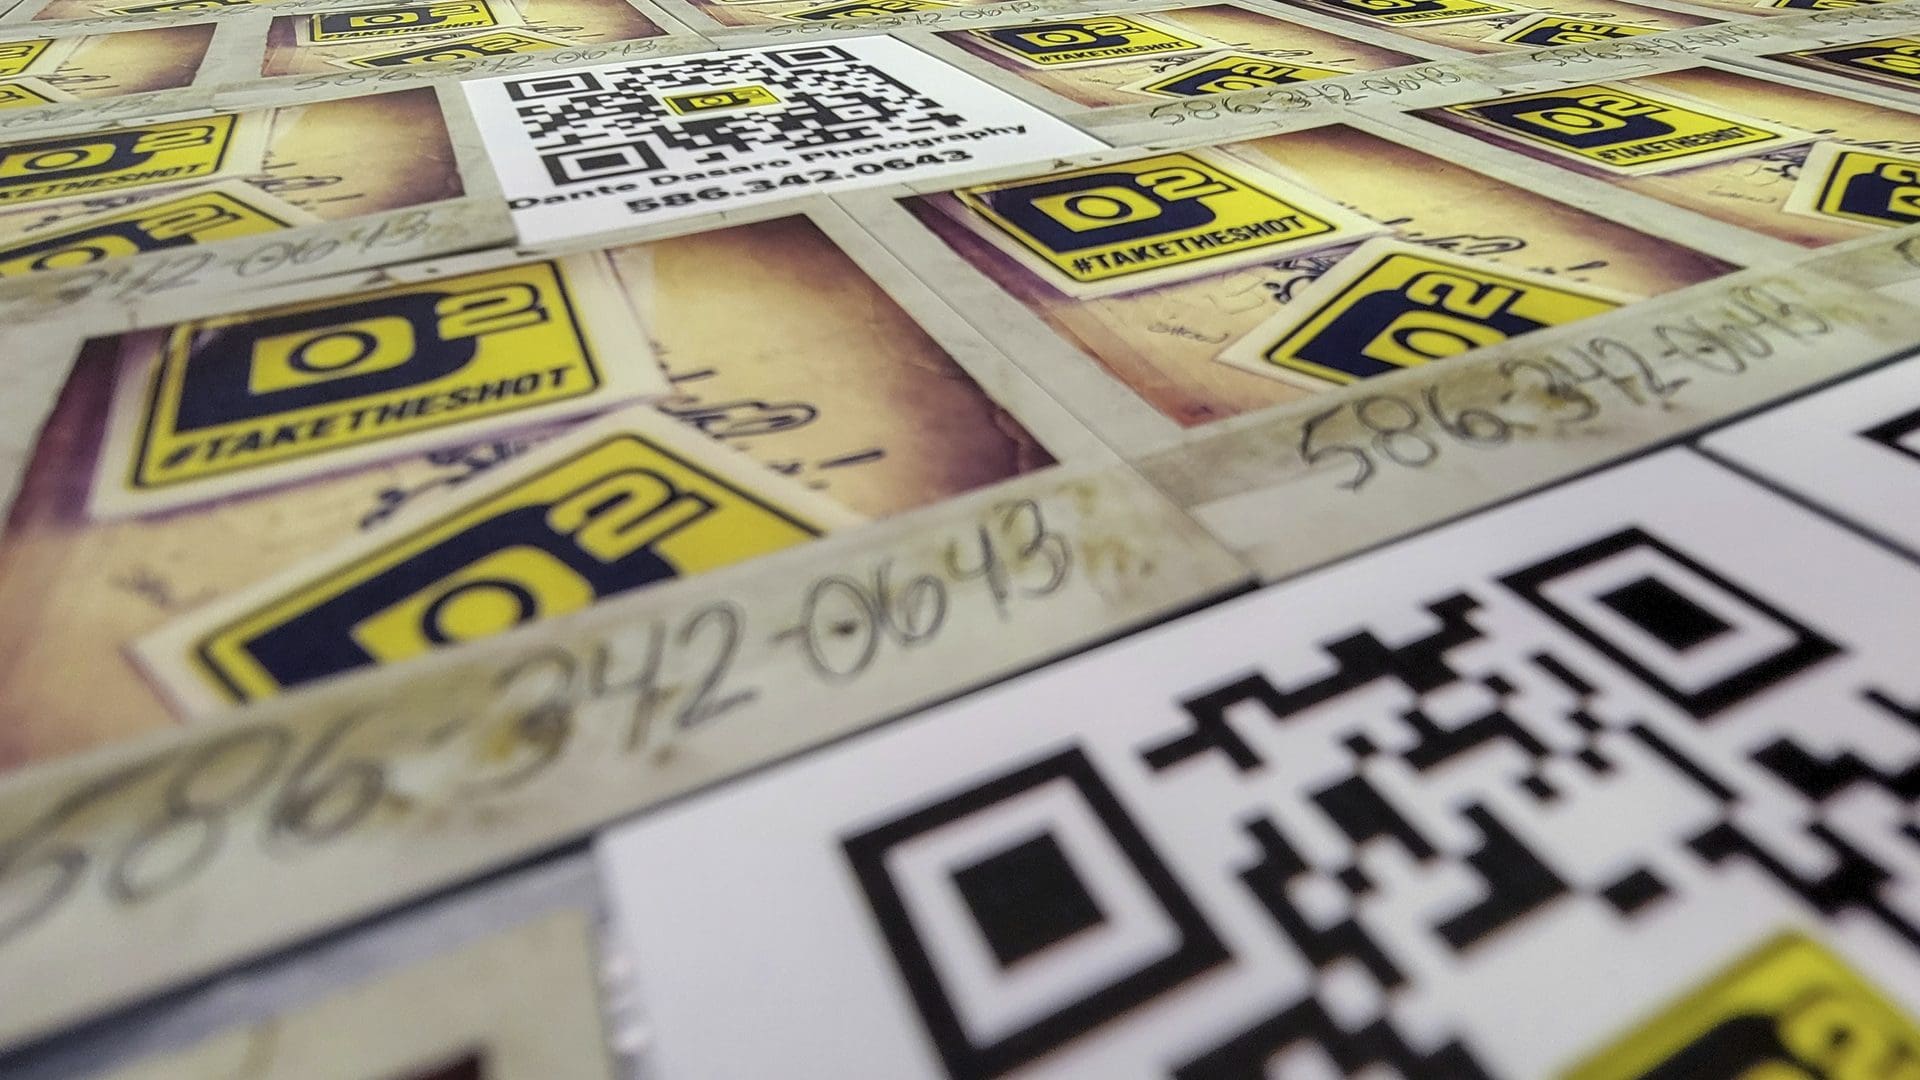 square business cards with qr code 2